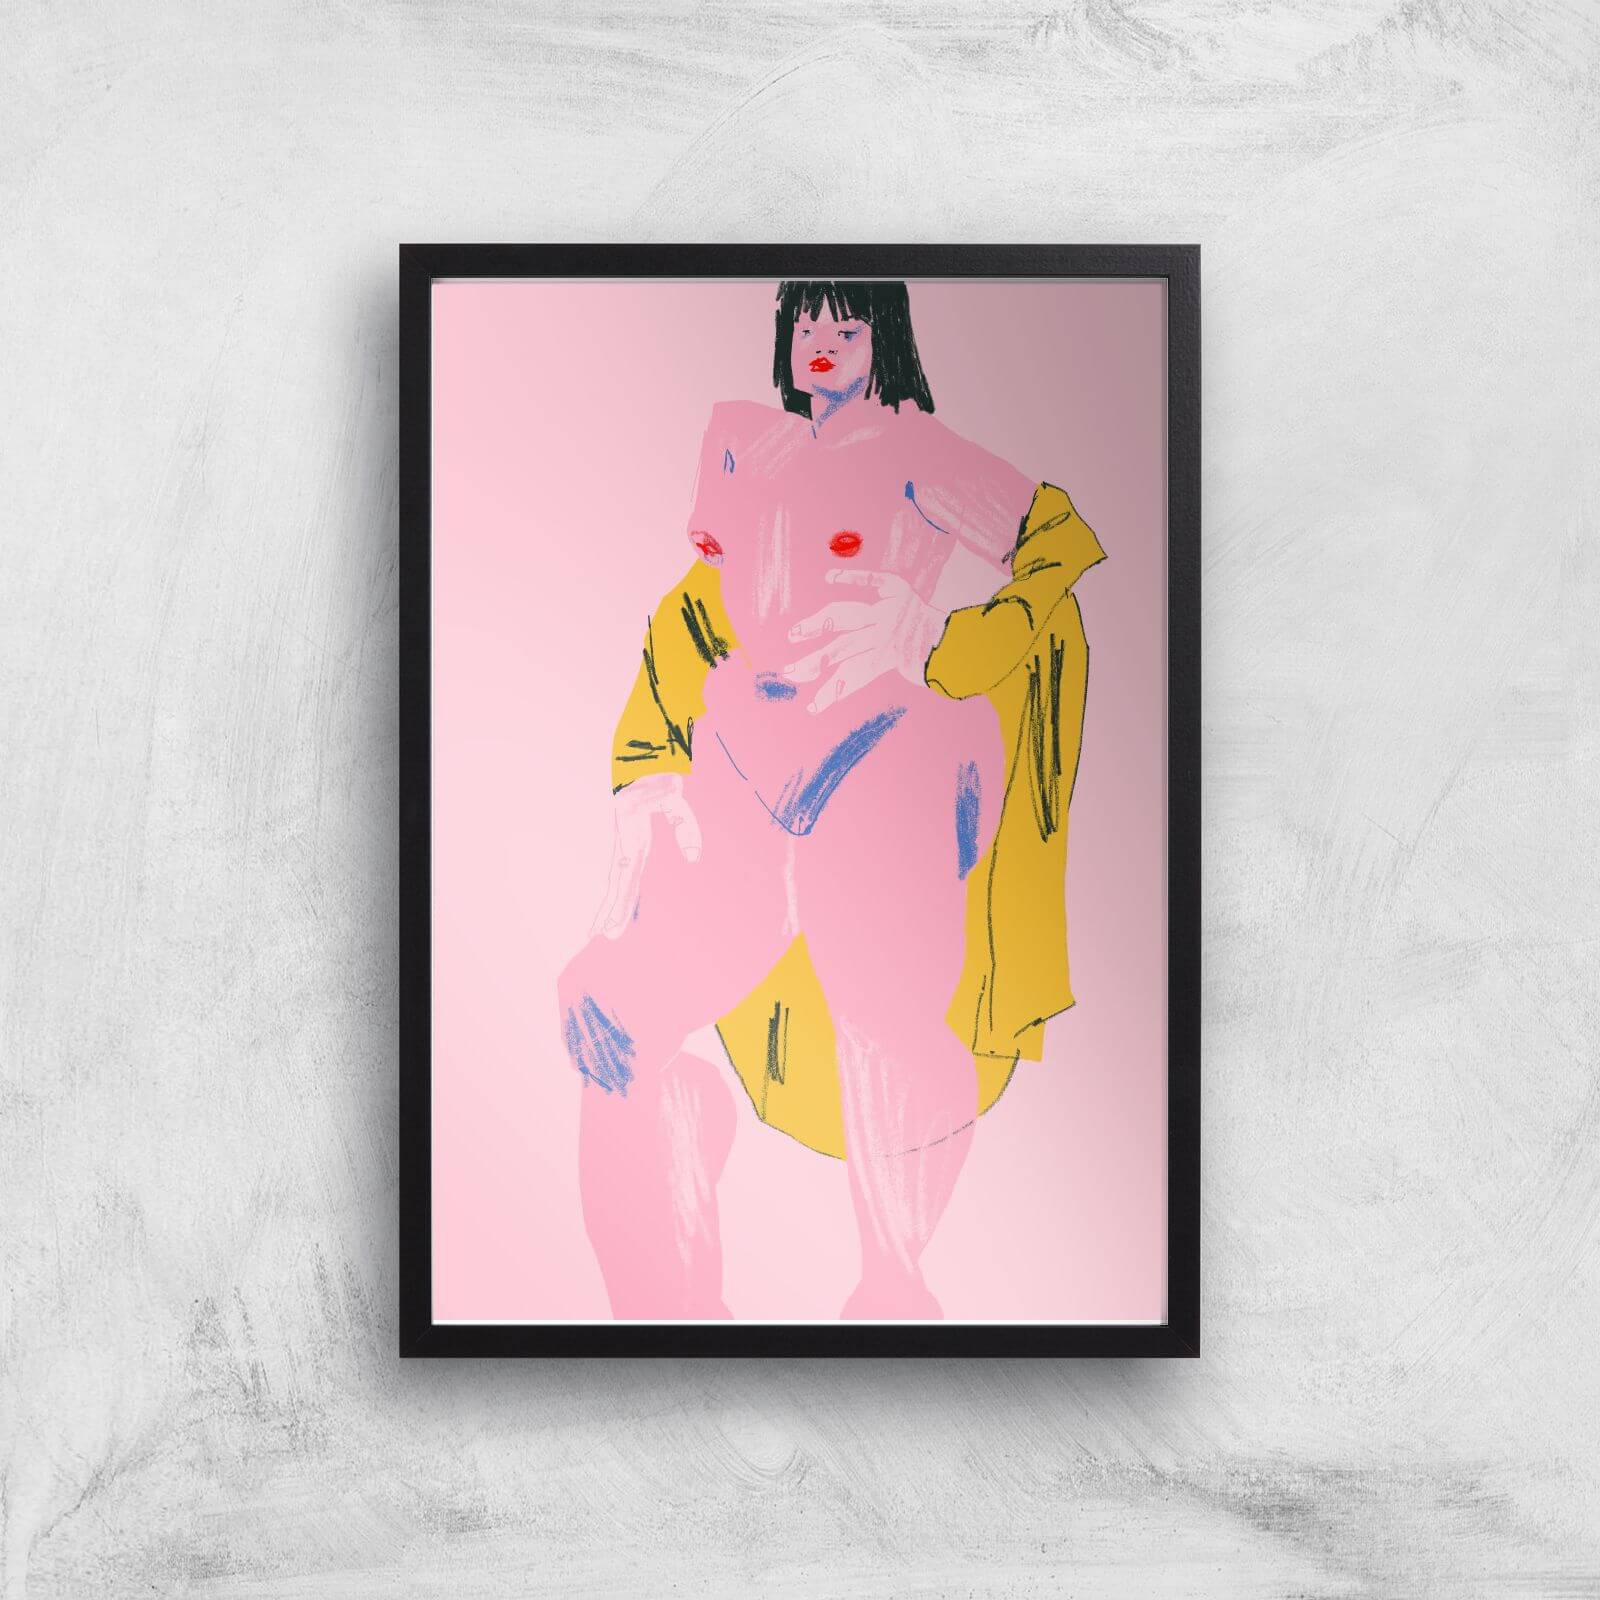 Pink & Yellow Nude Giclee Art Print - A2 - Black Frame